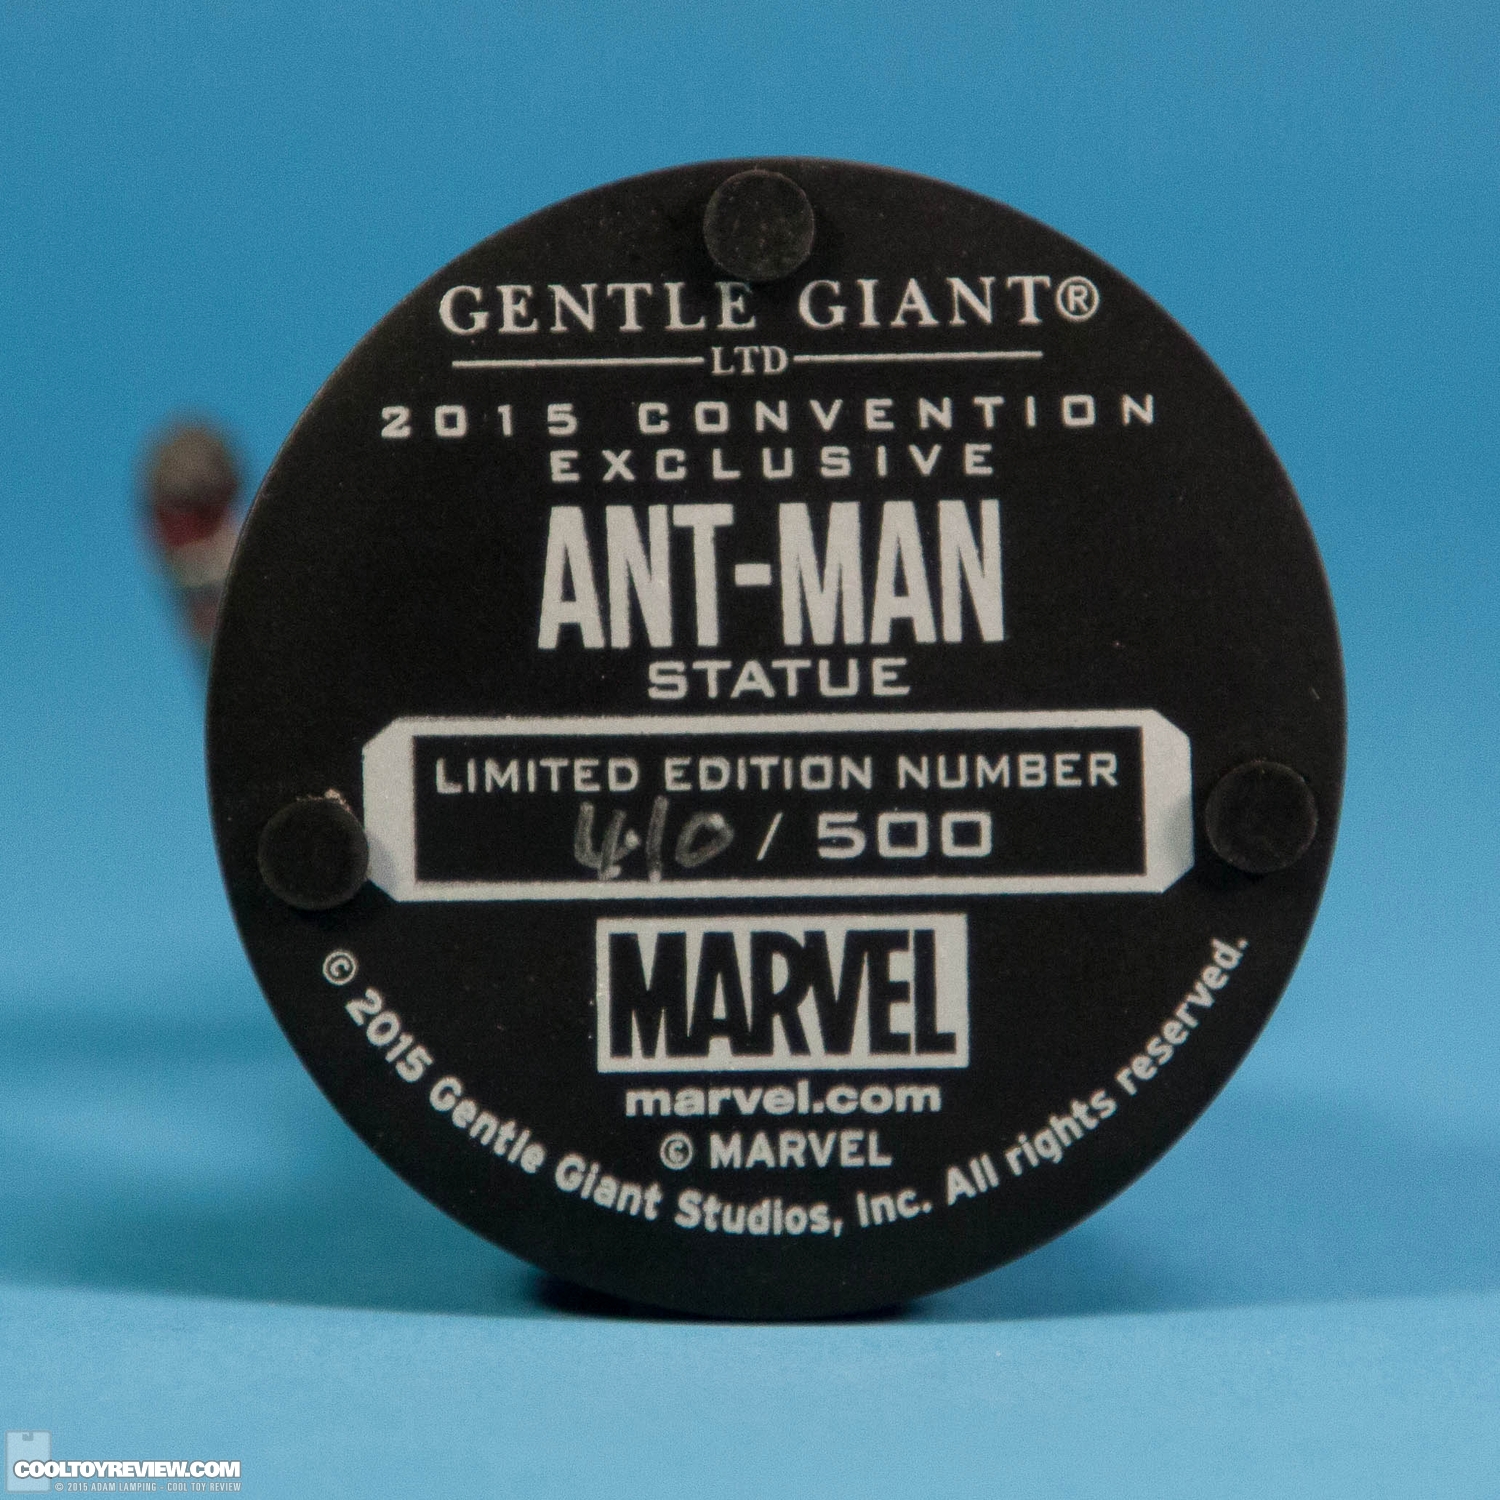 gentle-giant-ant-man-statue-2015-convention-exclusive-015.jpg